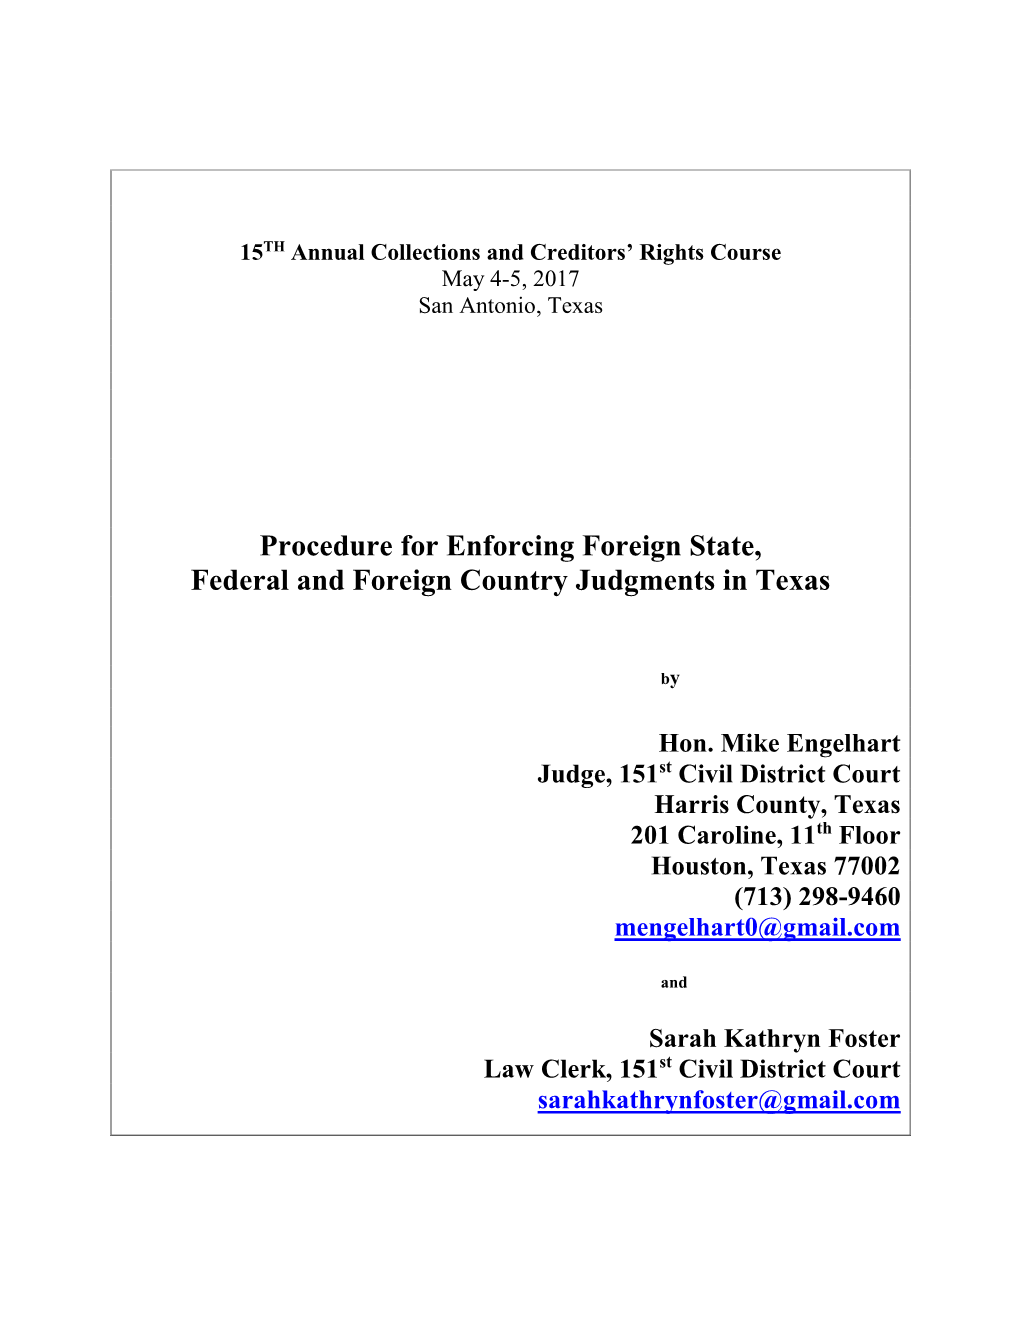 Procedure for Enforcing Foreign State, Federal and Foreign Country Judgments in Texas